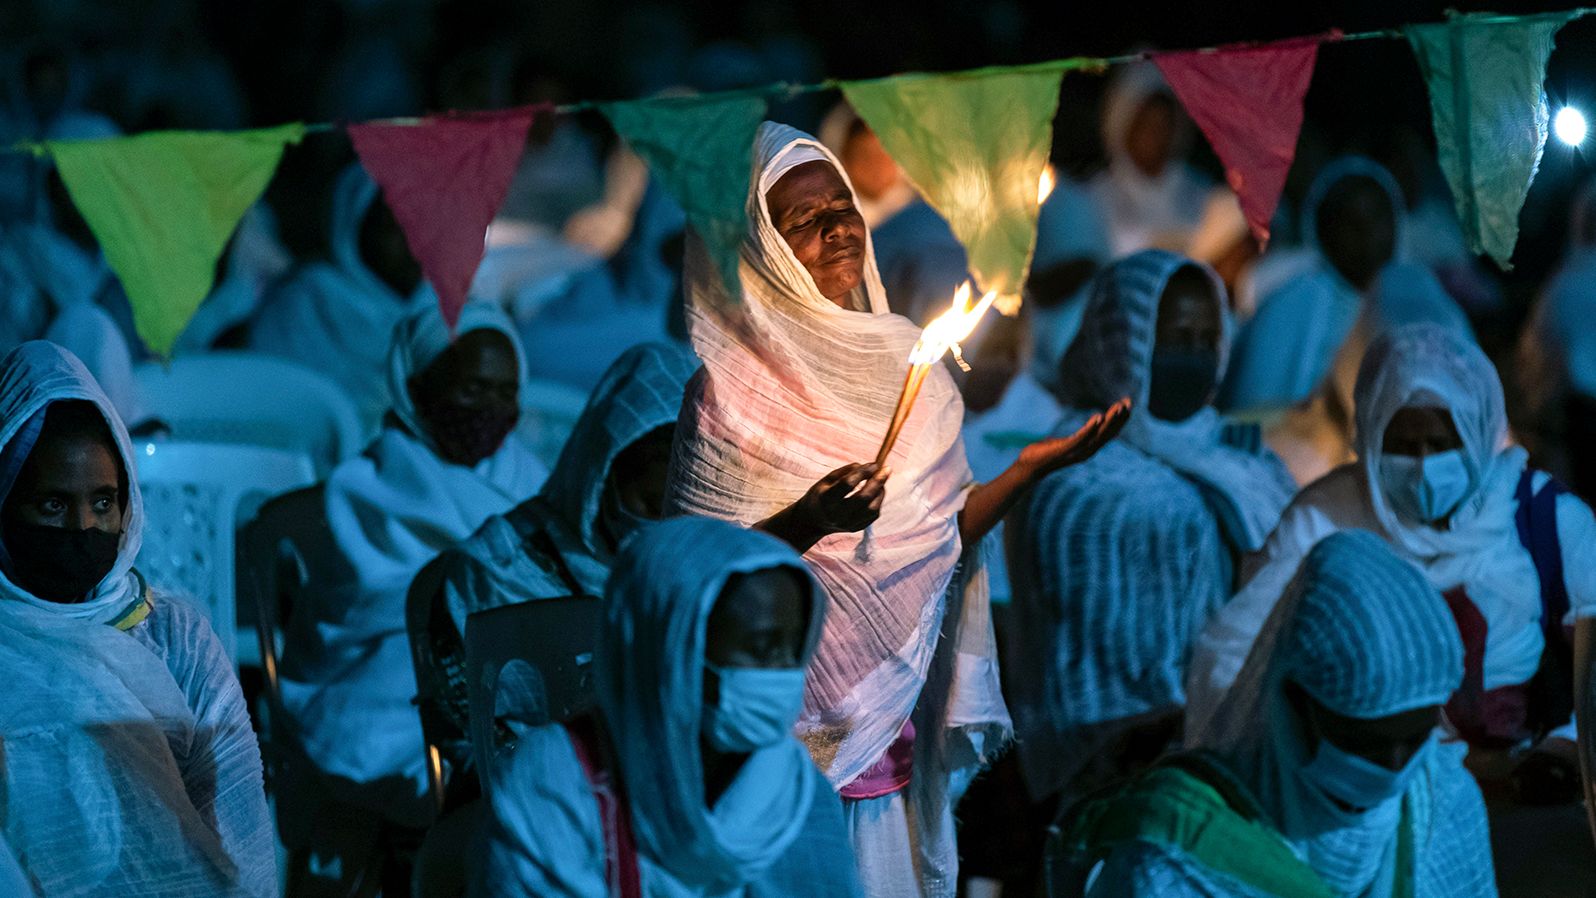 Ethiopian Orthodox Christians light candles and pray for peace during a church service at the Medhane Alem Cathedral in Addis Ababa, Ethiopia, on November 5.